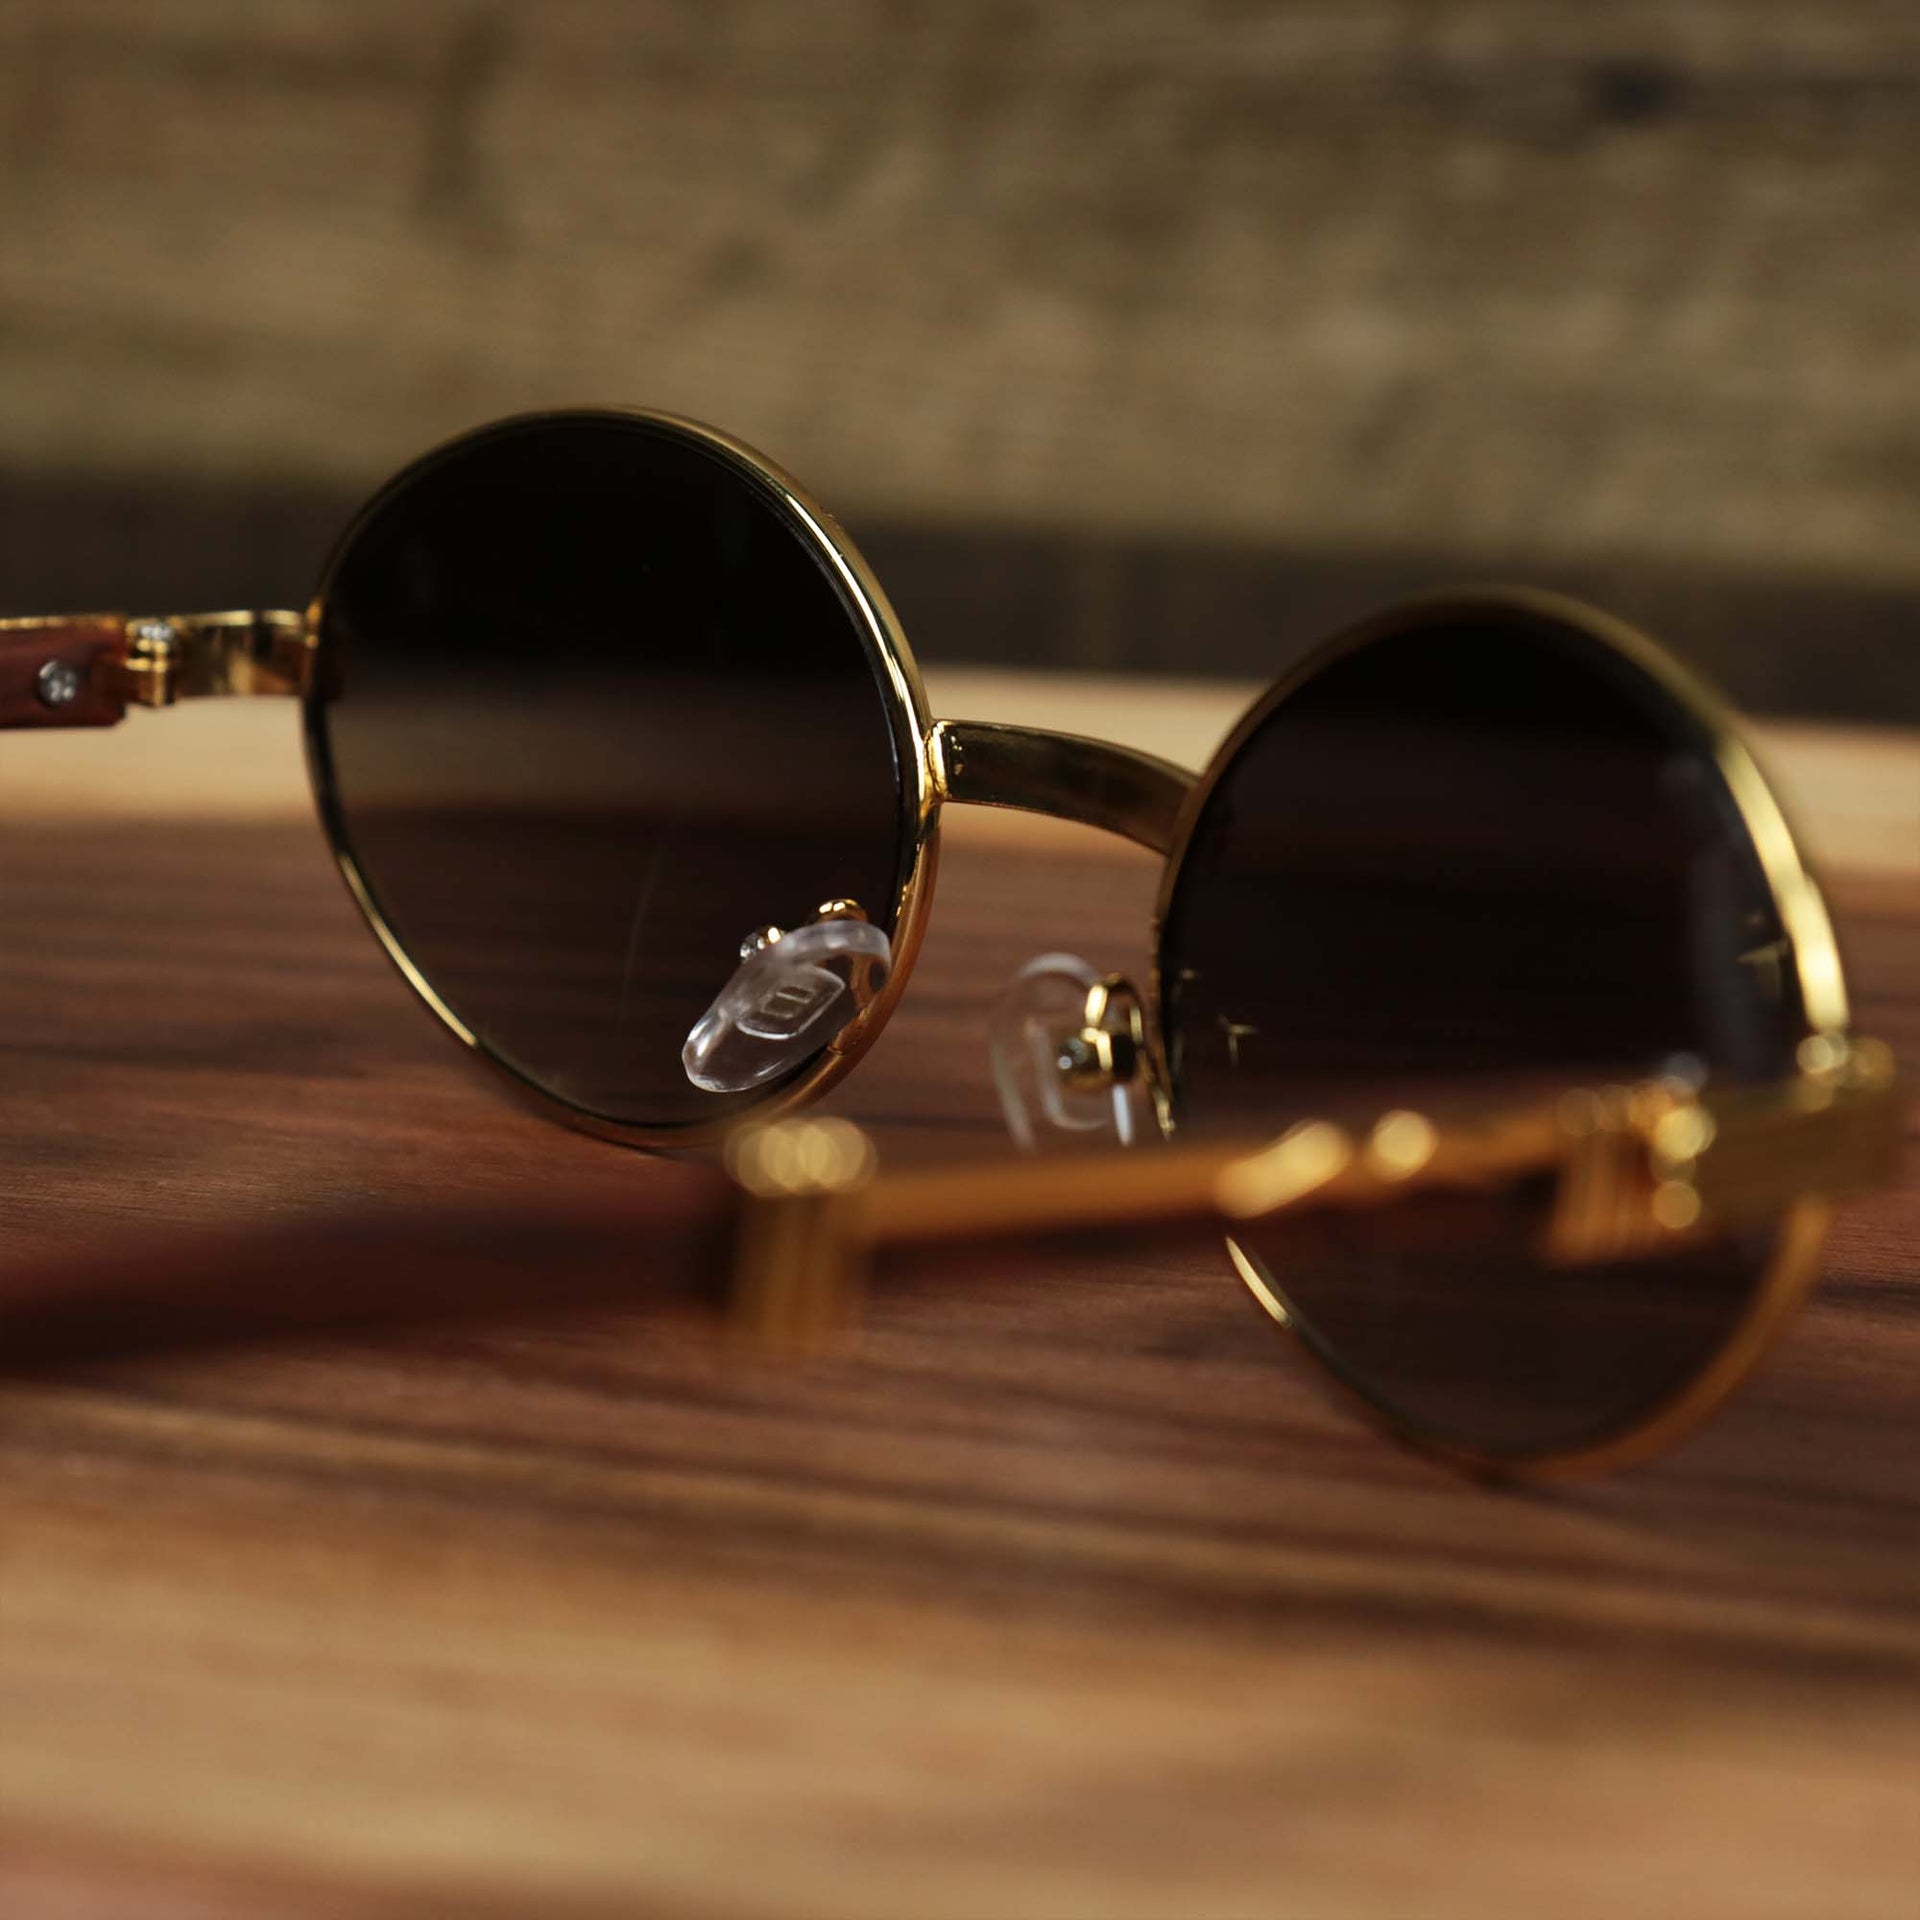 The inside of the Oval 3 Row Frame Black Lens Sunglasses with Gold Frame